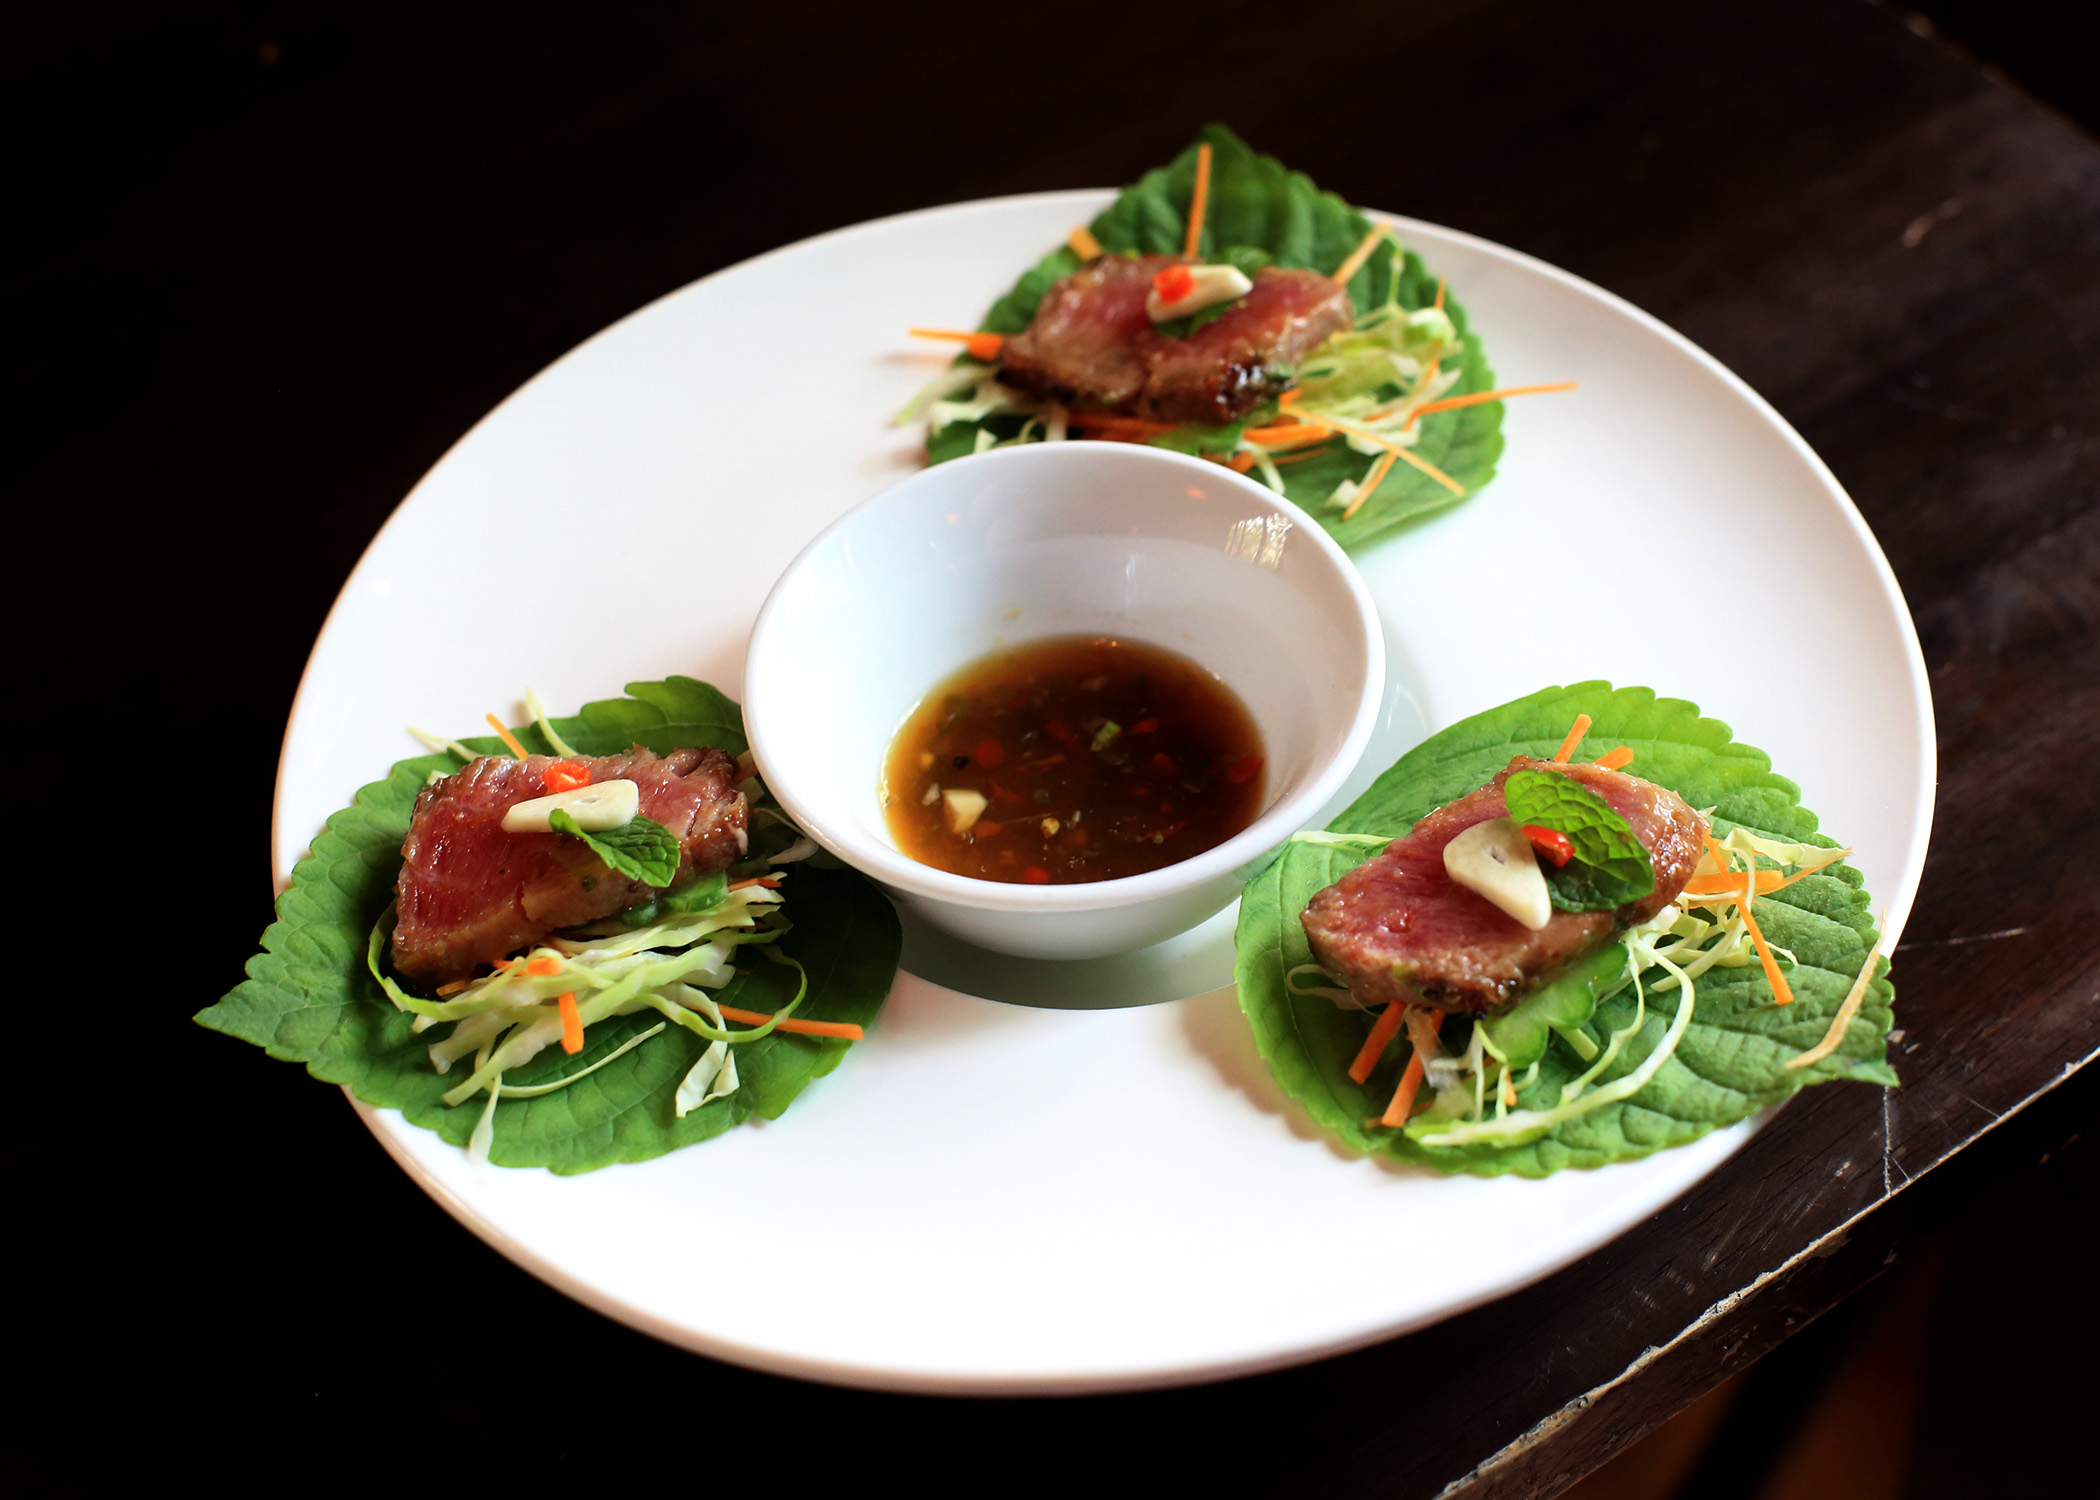 Thai shimi at Guerrera, seared local tuna served on a fresh sesame leaf with thai chili and hot dipping sauce